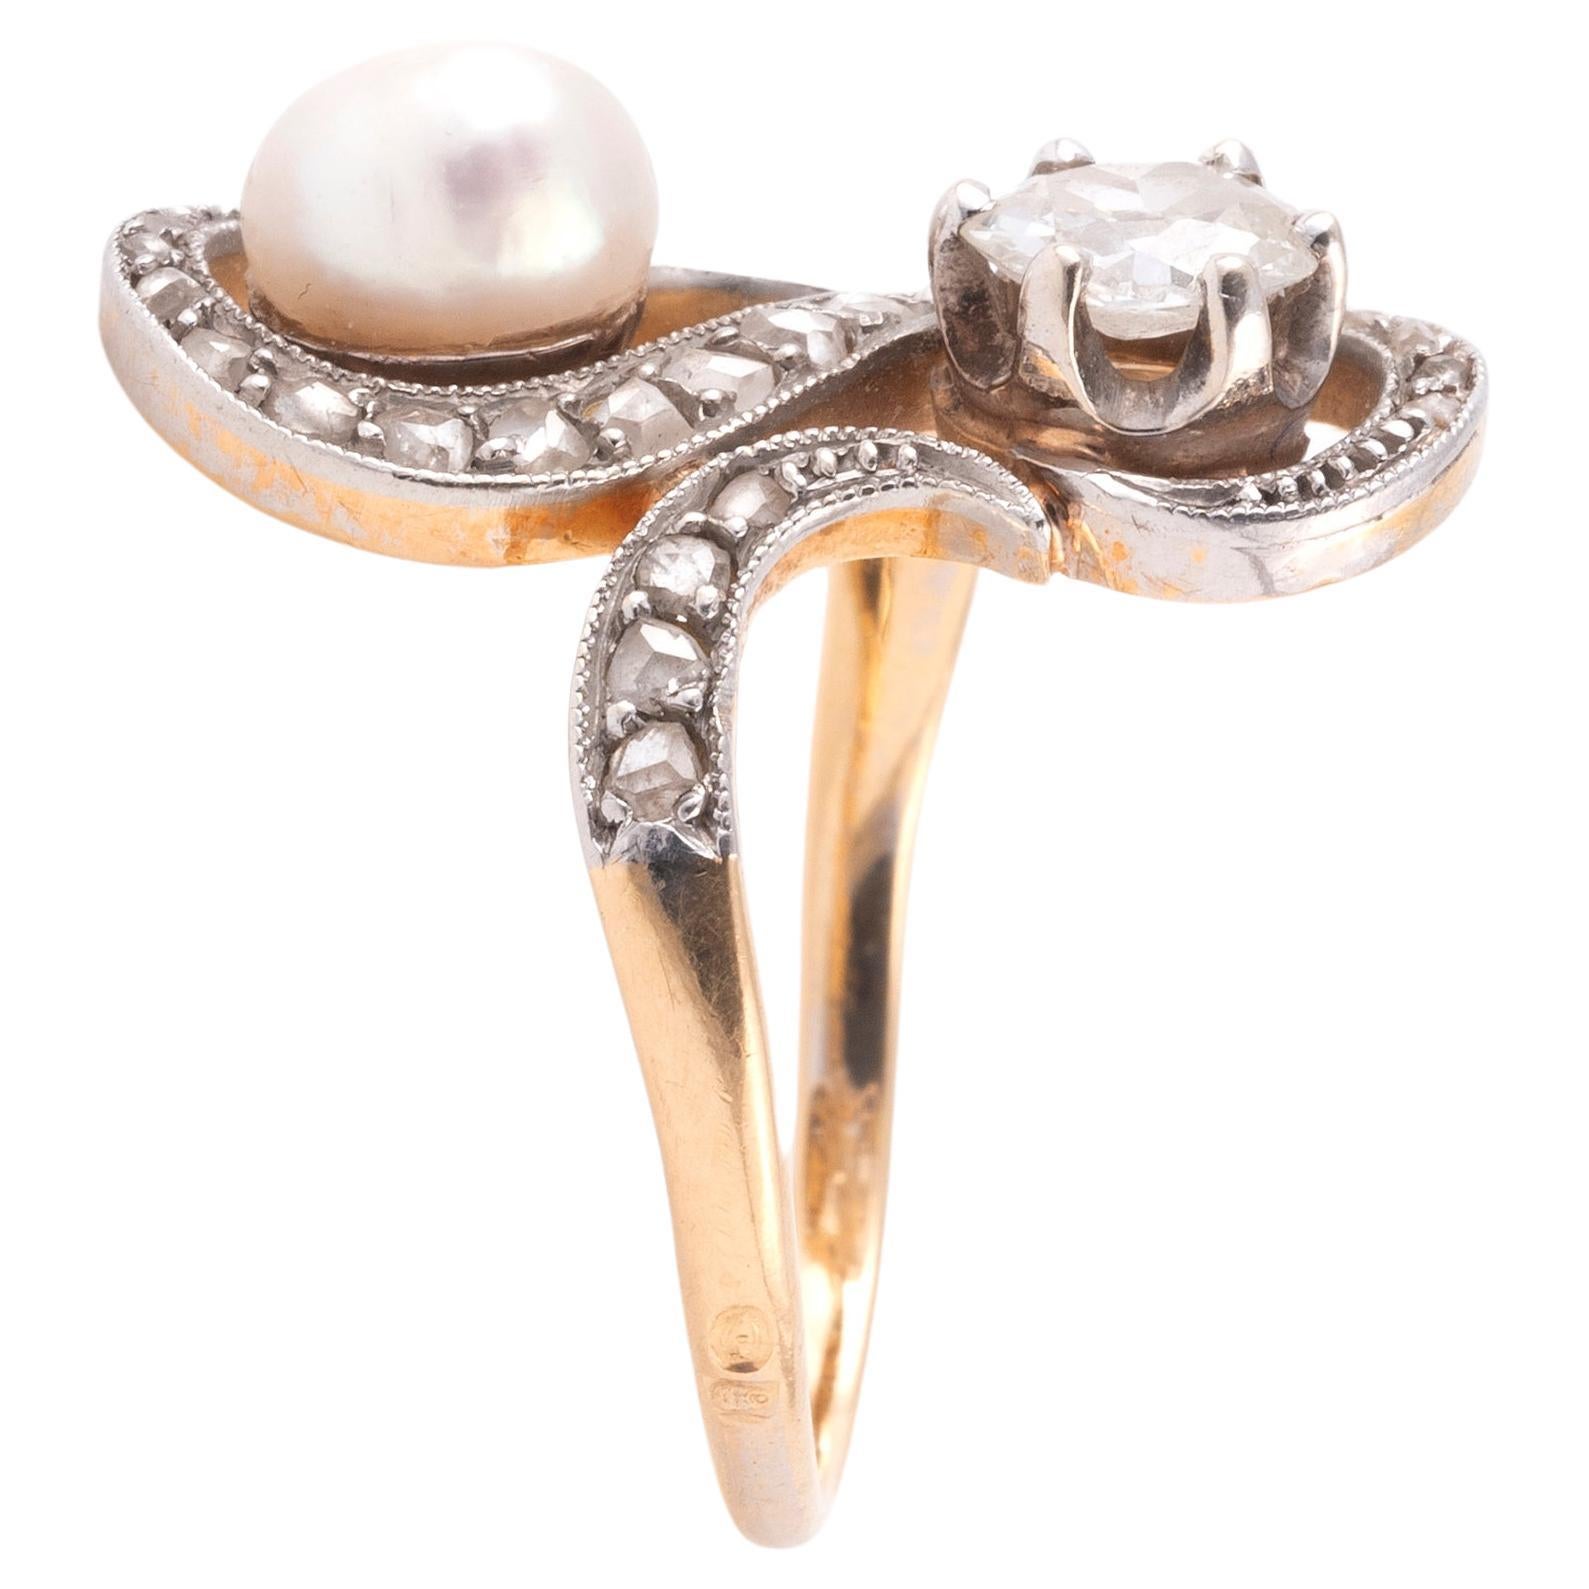 Toi et Moi ring in yellow gold 750 thousandths and platinum 850 thousandths, centered on a white button pearl and an old-cut diamond, underlined by scrolls set with rose-cut diamonds.
Pearl size: 5.5x6.6mm.
Main diamond weight: approx. 0.50